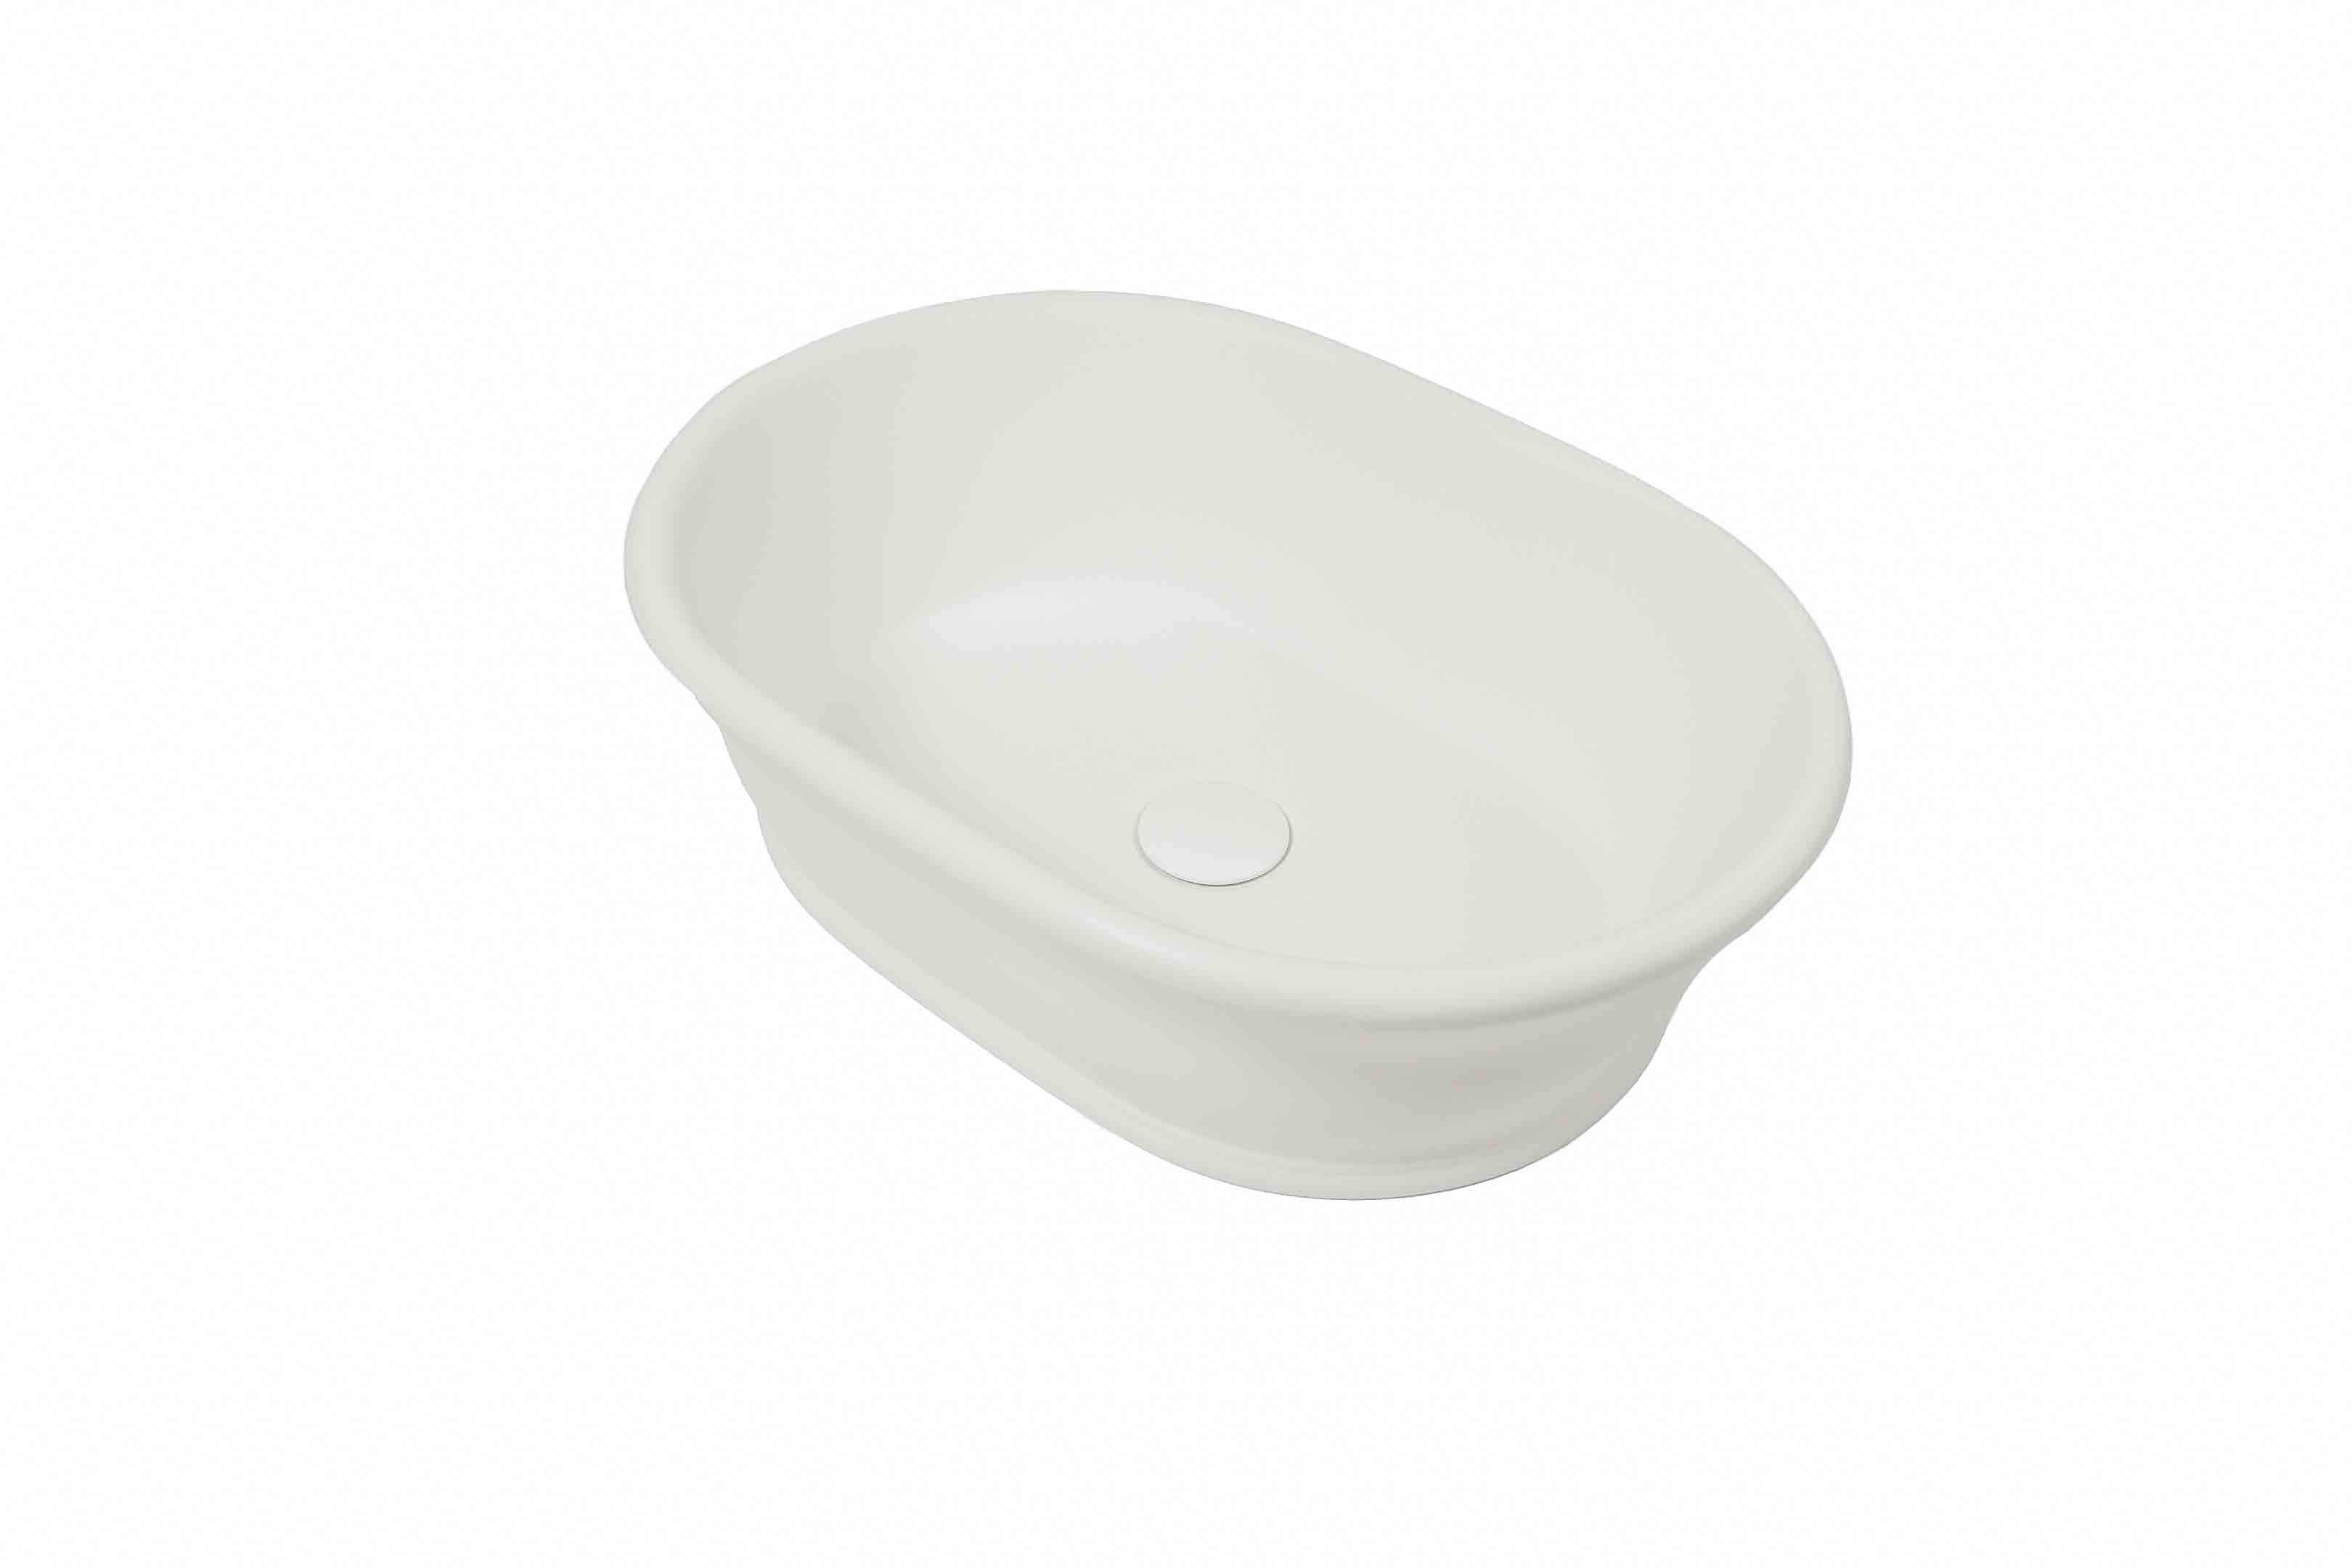 TURNER HASTINGS CAMBRIDGE OVAL TITANCAST SOLID SURFACE ABOVE COUNTER BASIN GLOSS WHITE 535MM